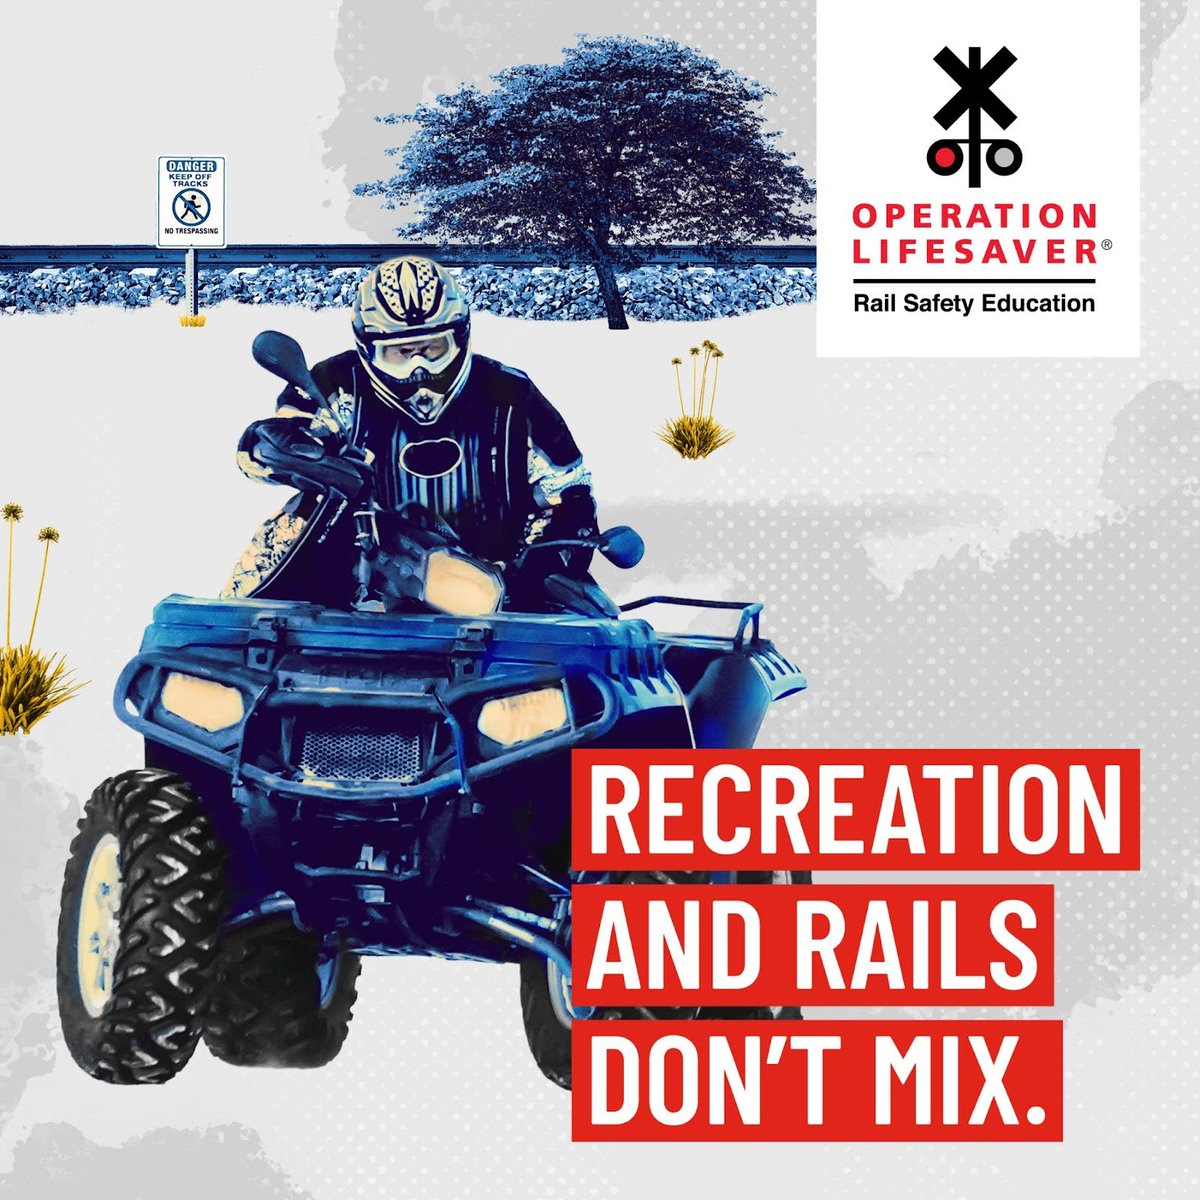 Stay safe this Memorial Day (and every day). Keep recreational activities off and away from railroad tracks! Stay off, stay away, and stay safe! #MemorialDay #SeeTracksThinkTrain